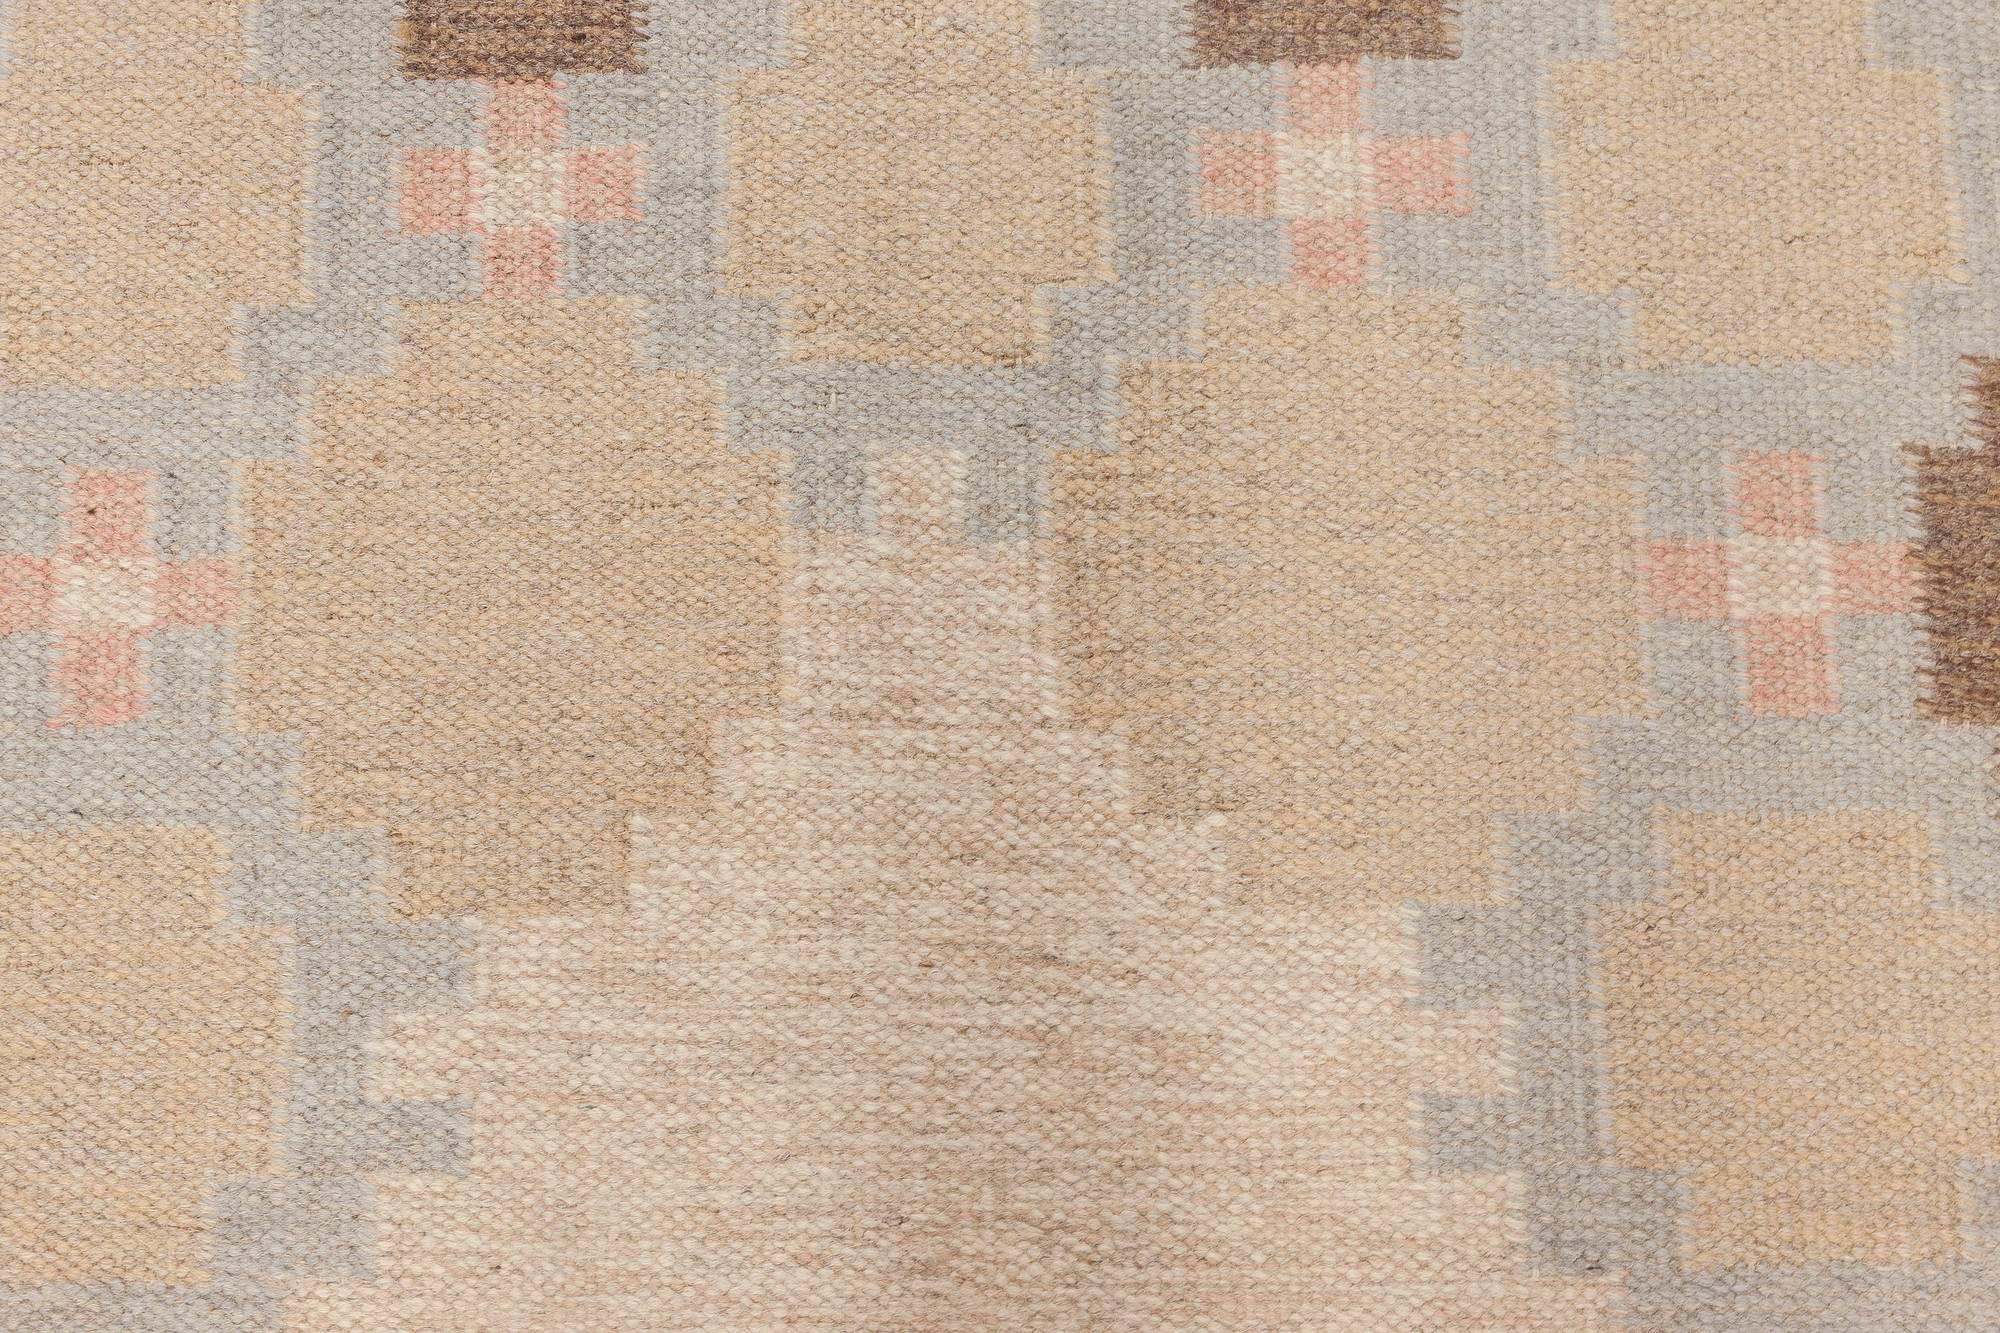 Mid-20th century Swedish beige, brown and blue flat-weave wool rug
Size: 5'9